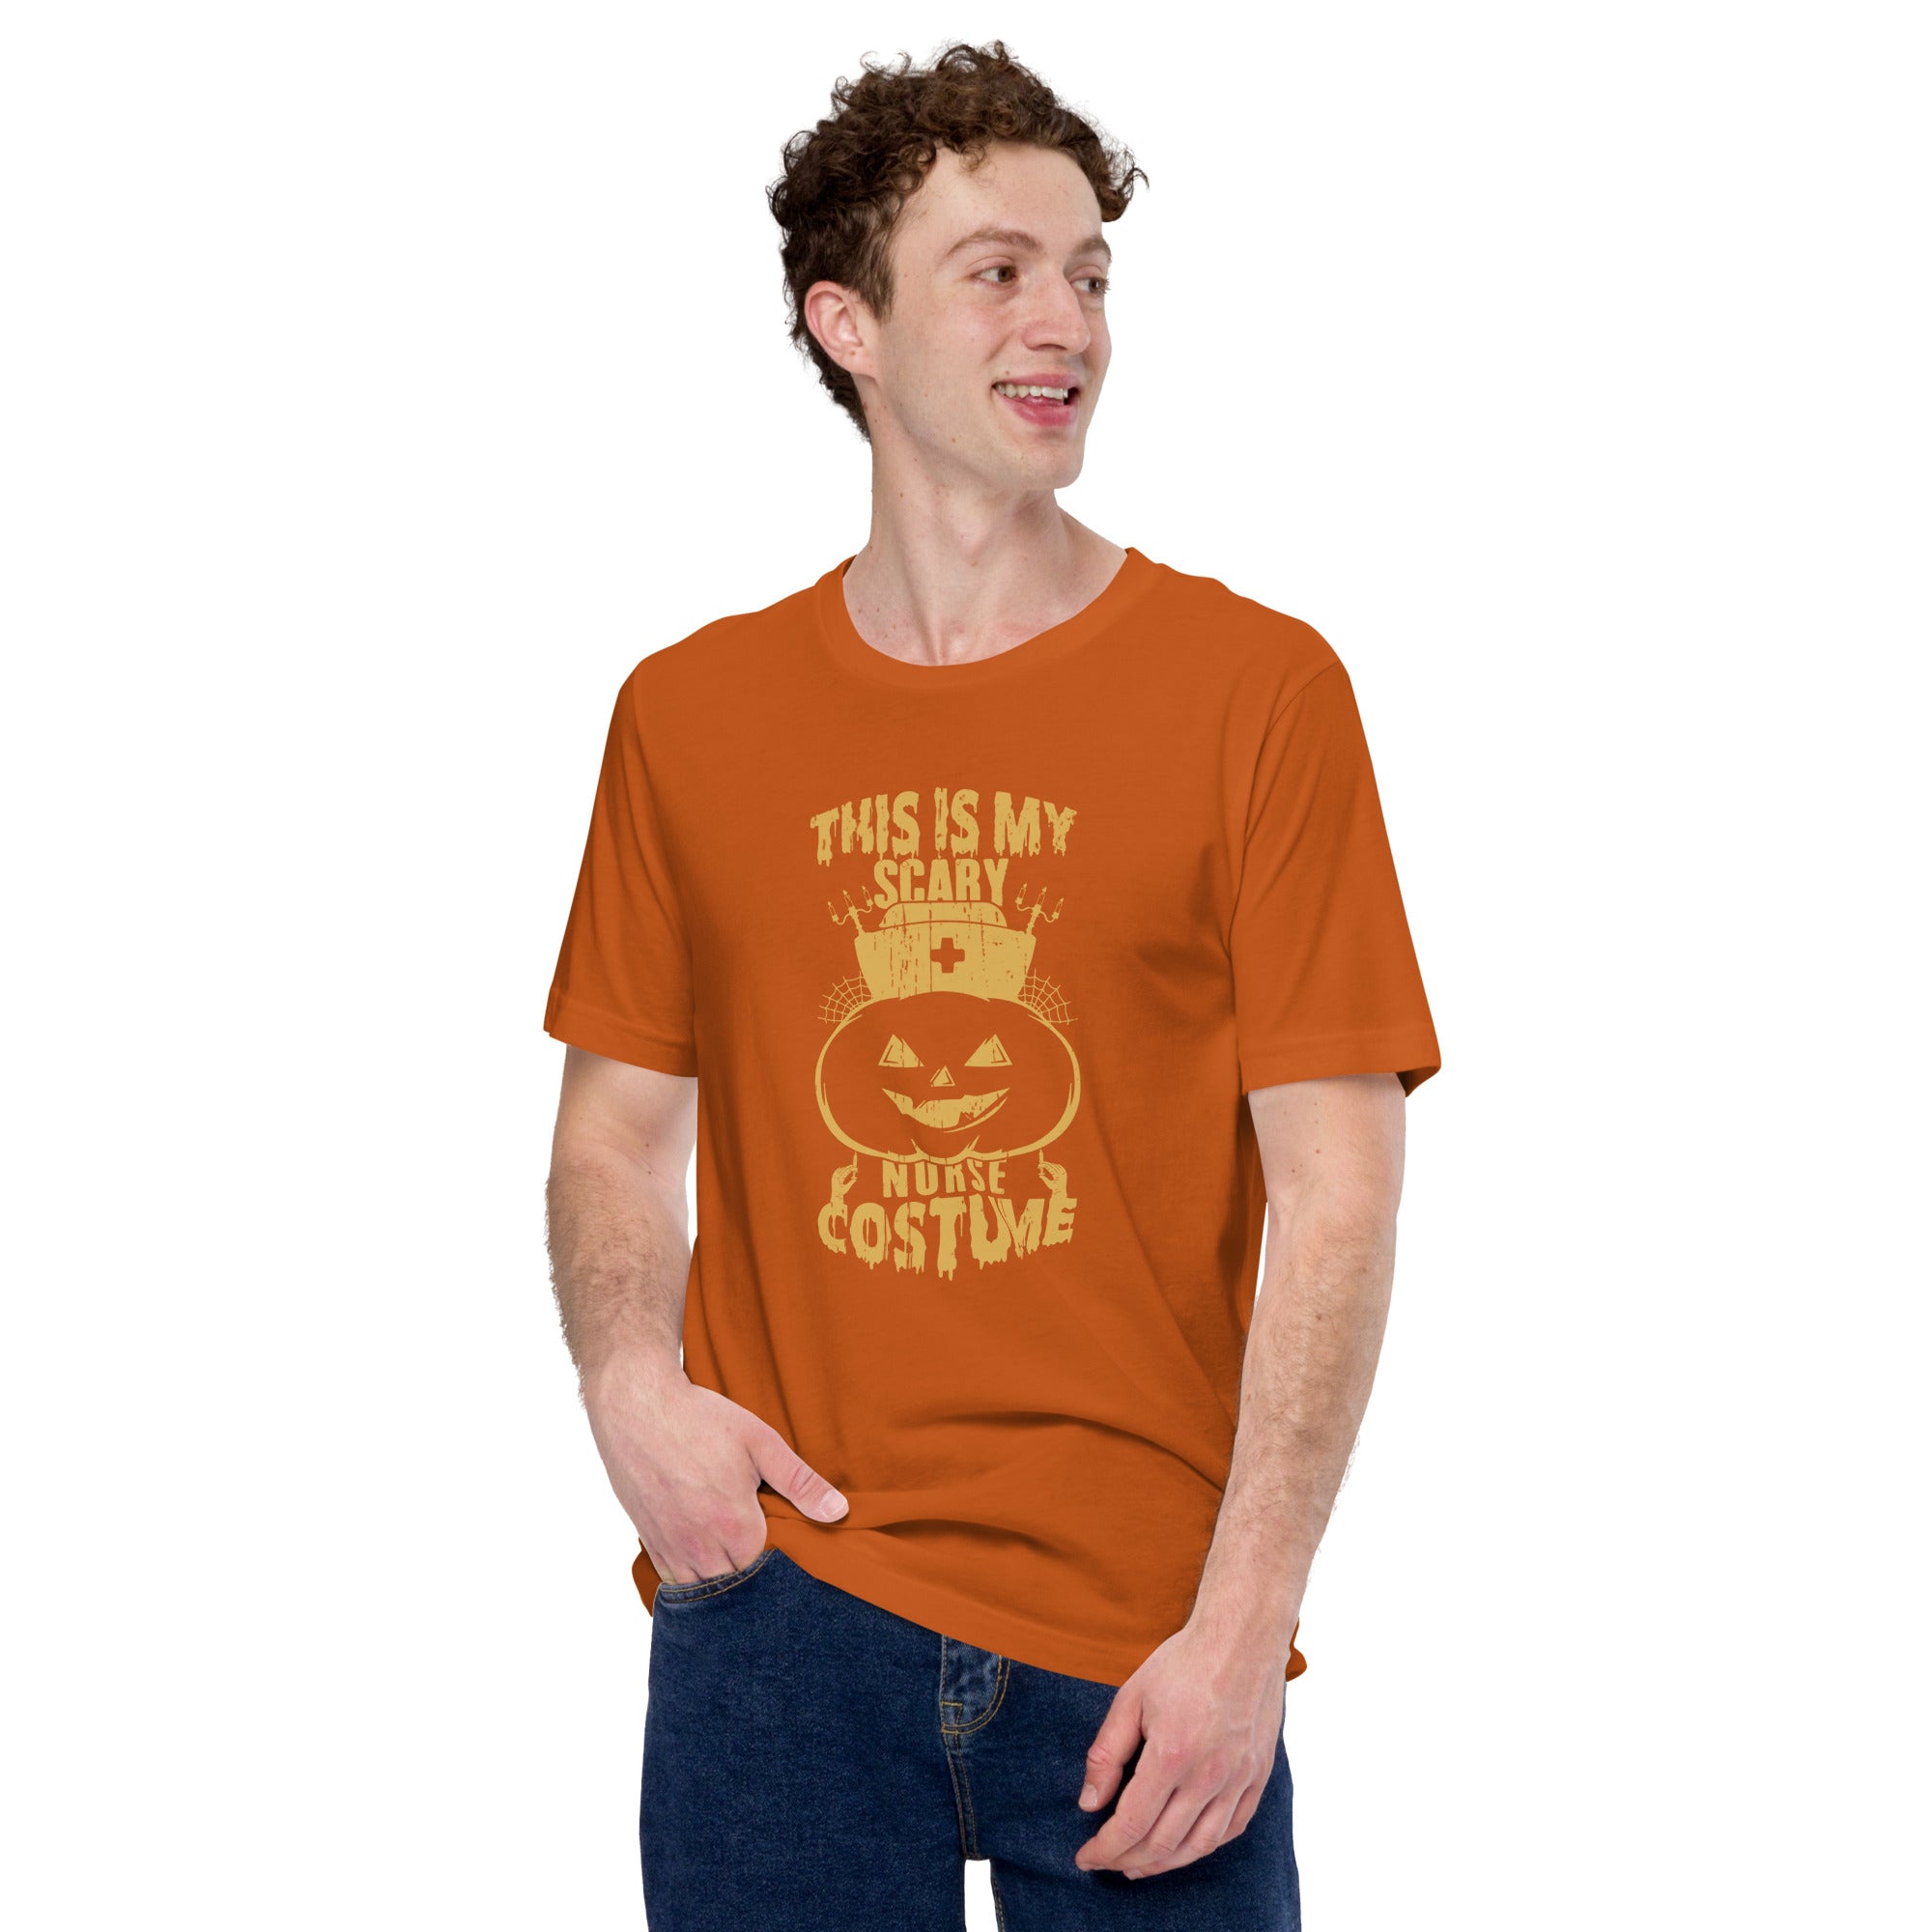 This Is My Scary Nurse Costume Unisex t-shirt